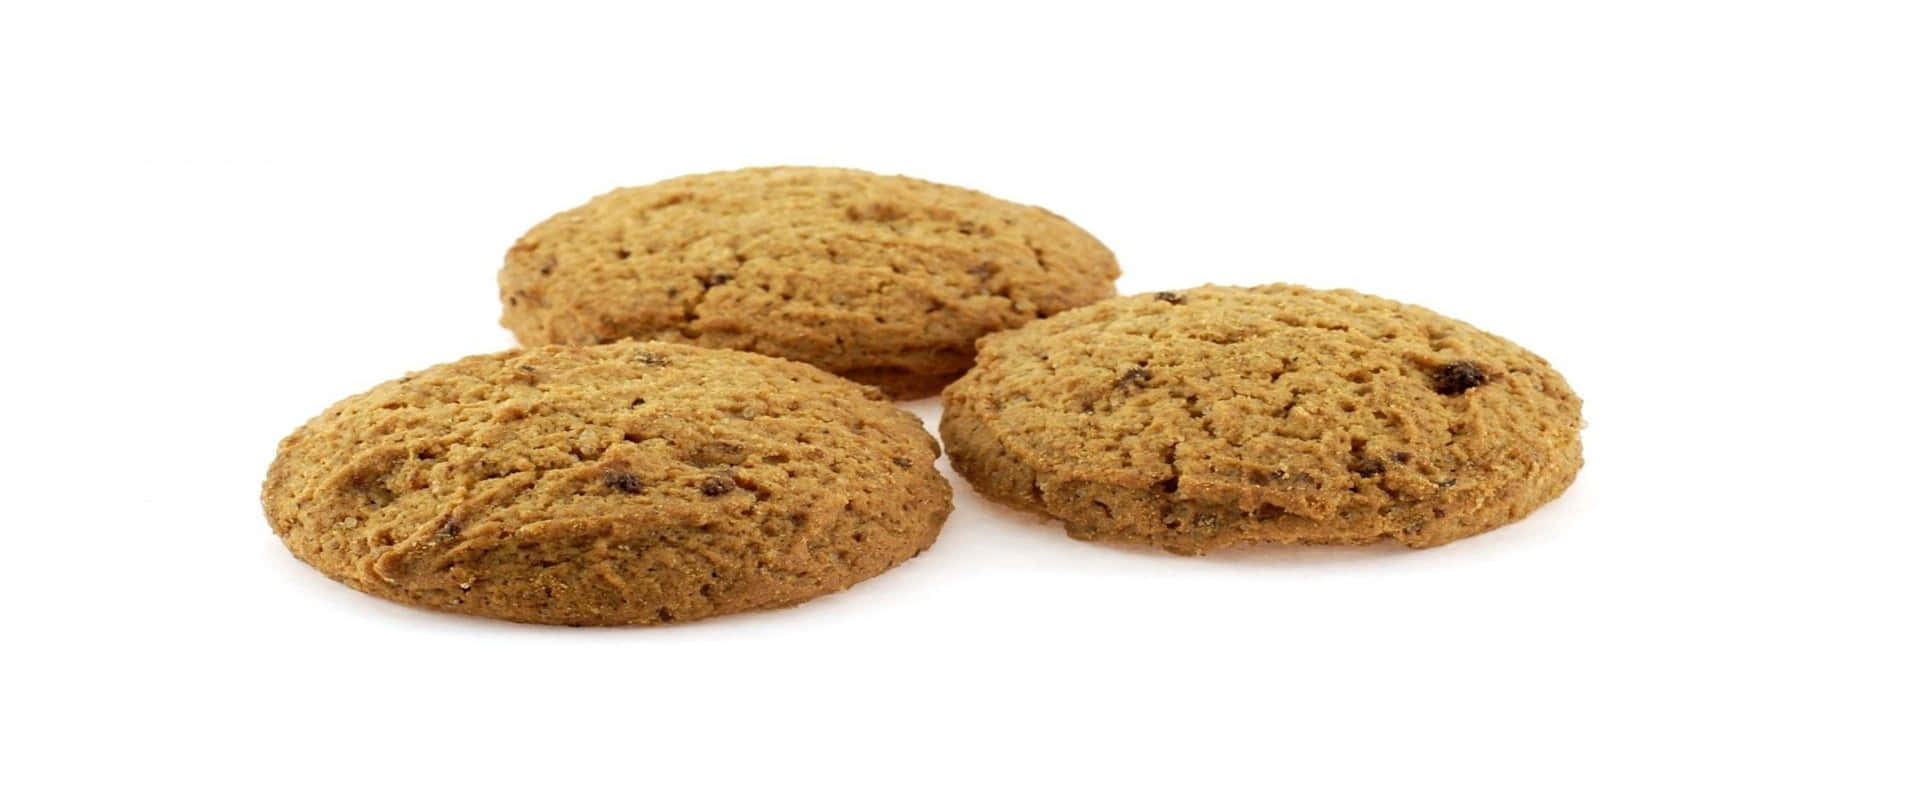 Three Fresh Baked Snack 3440x1440p Cookies Background